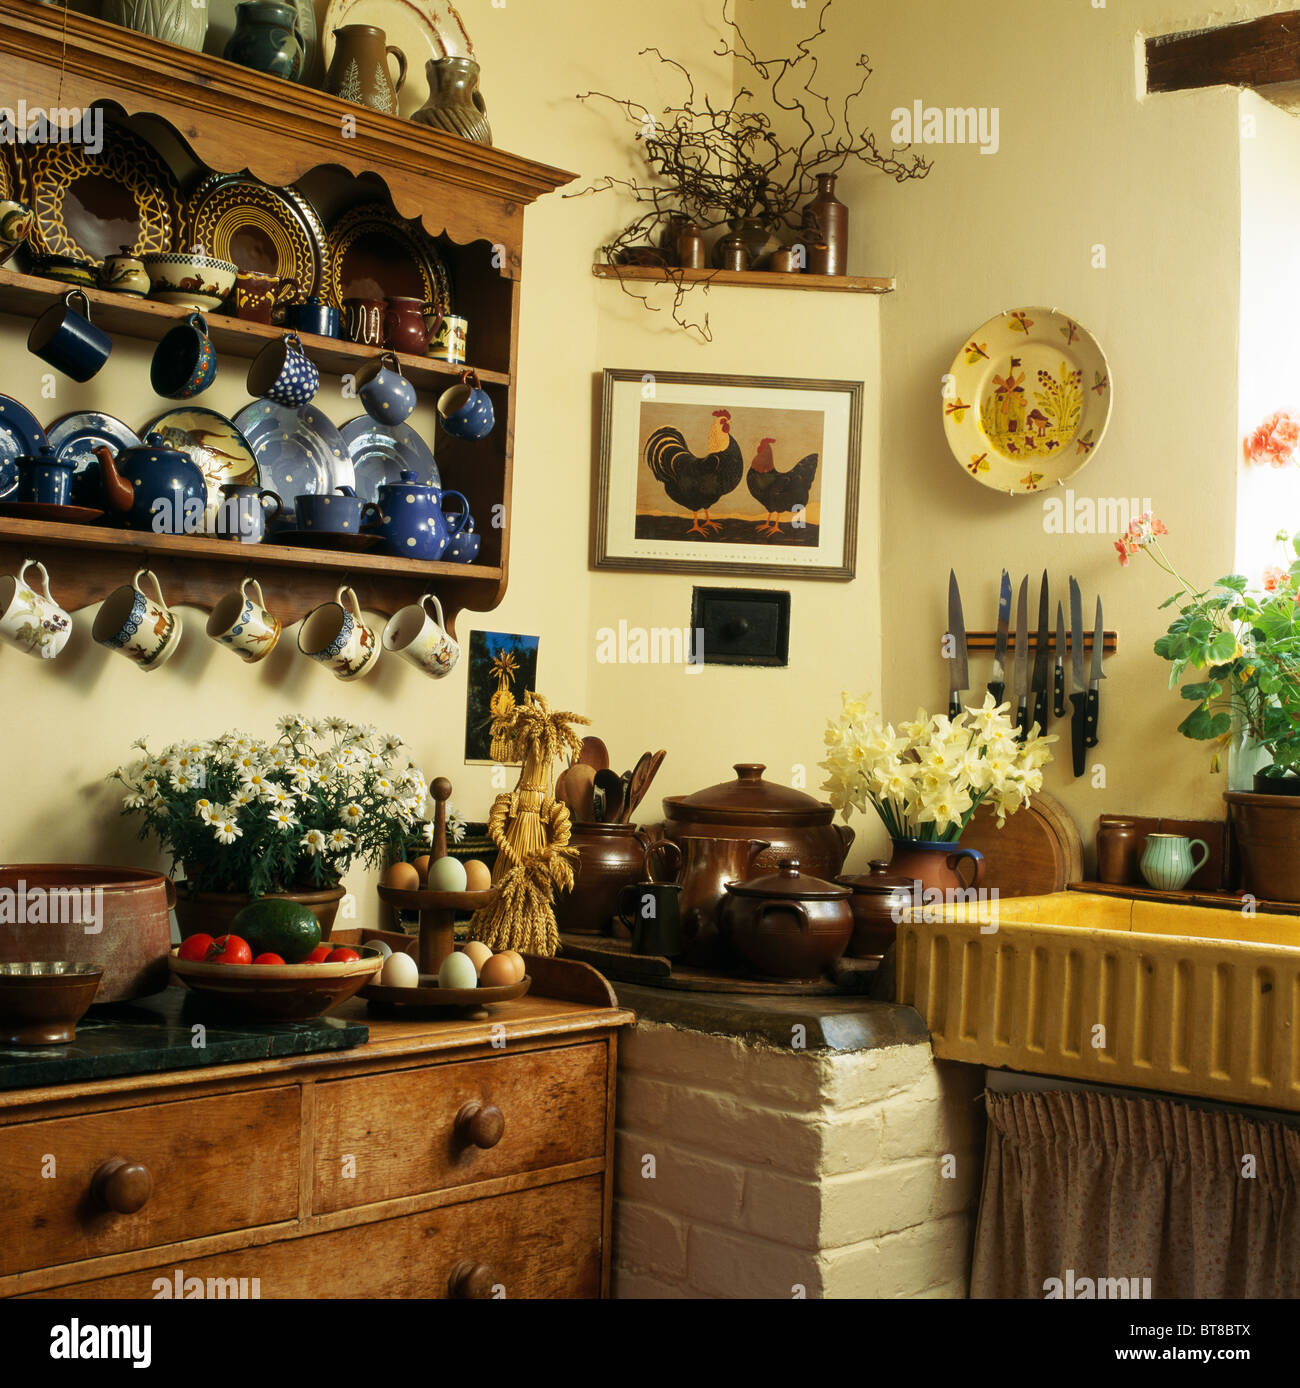 Blue China On Pine Shelves Above Old Wooden Chest Of Drawers In